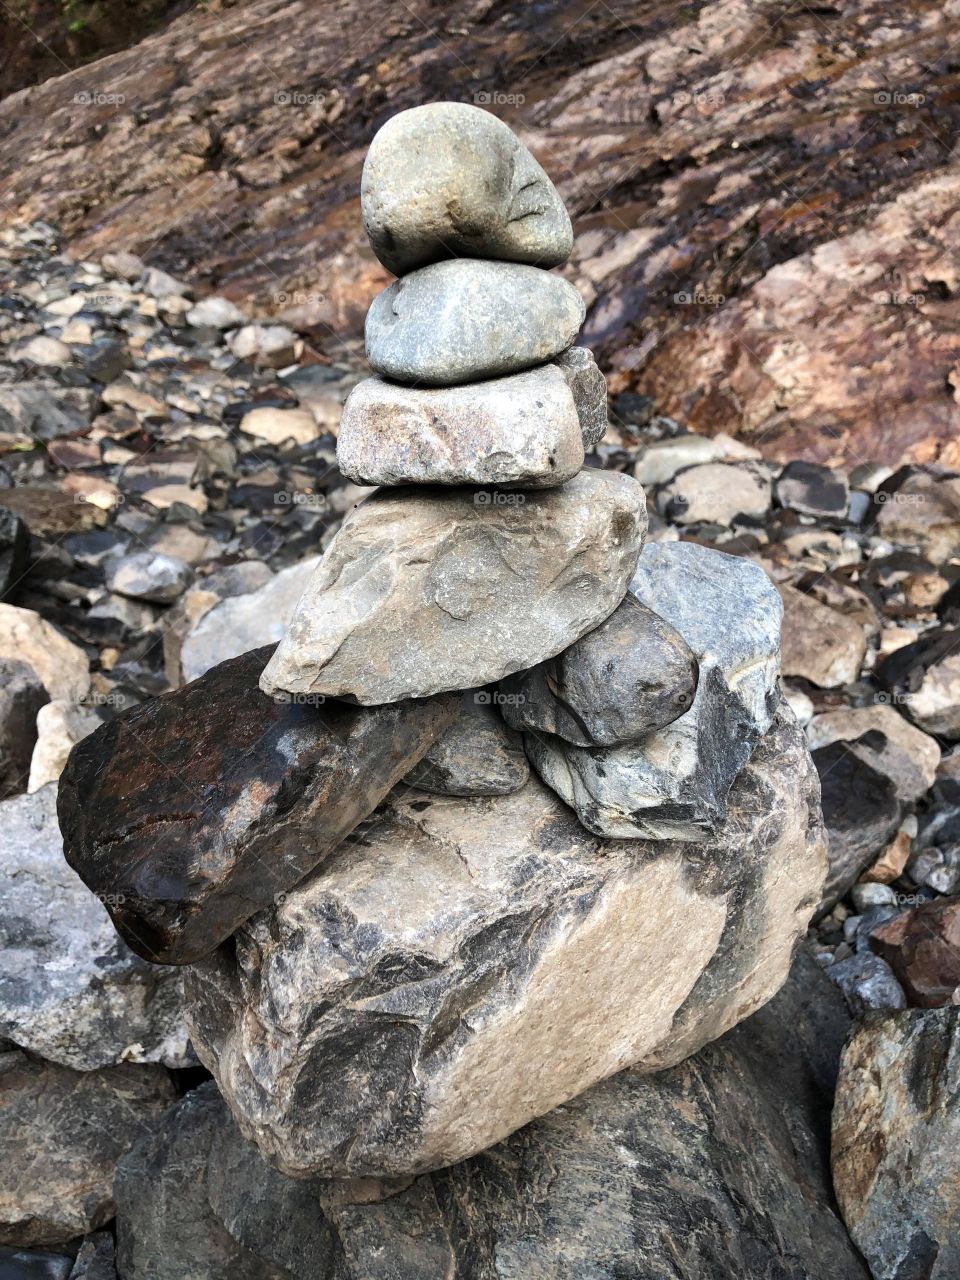 Rock stacking competition, mine topped before I could take a photo but here is one of my friend's.